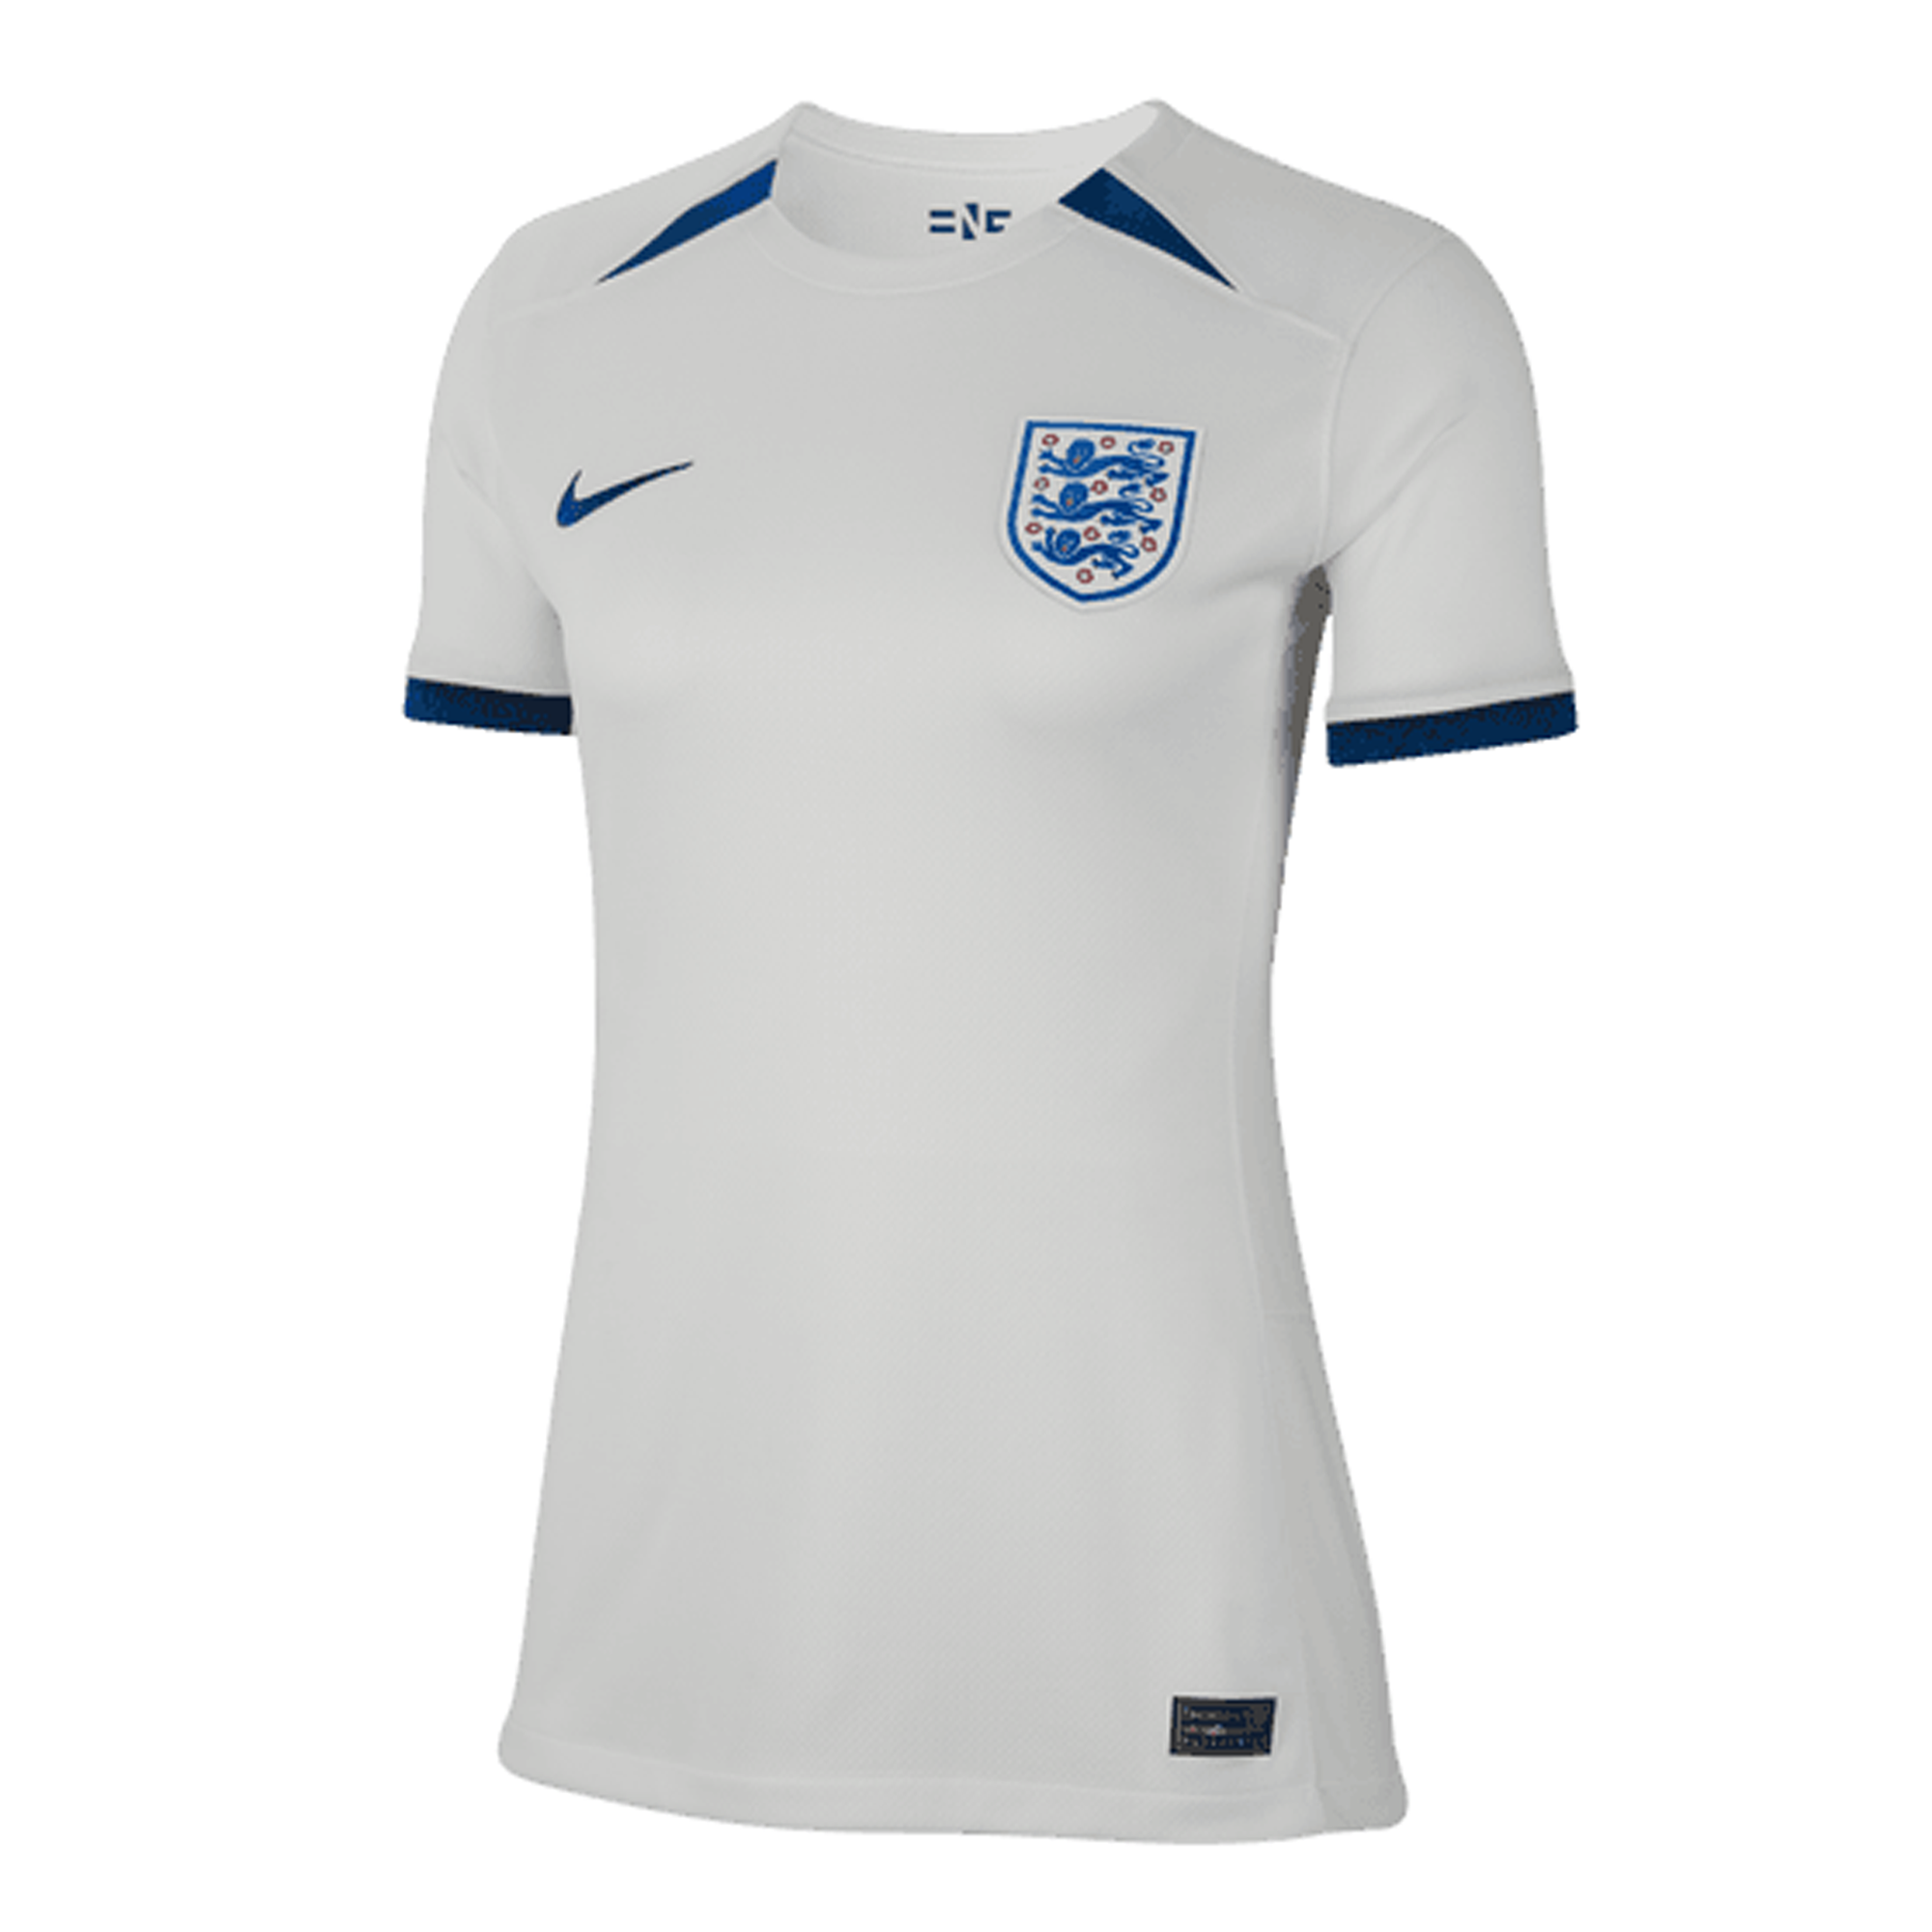 Lionesses kit 2023: Where to buy the England women's team shirts